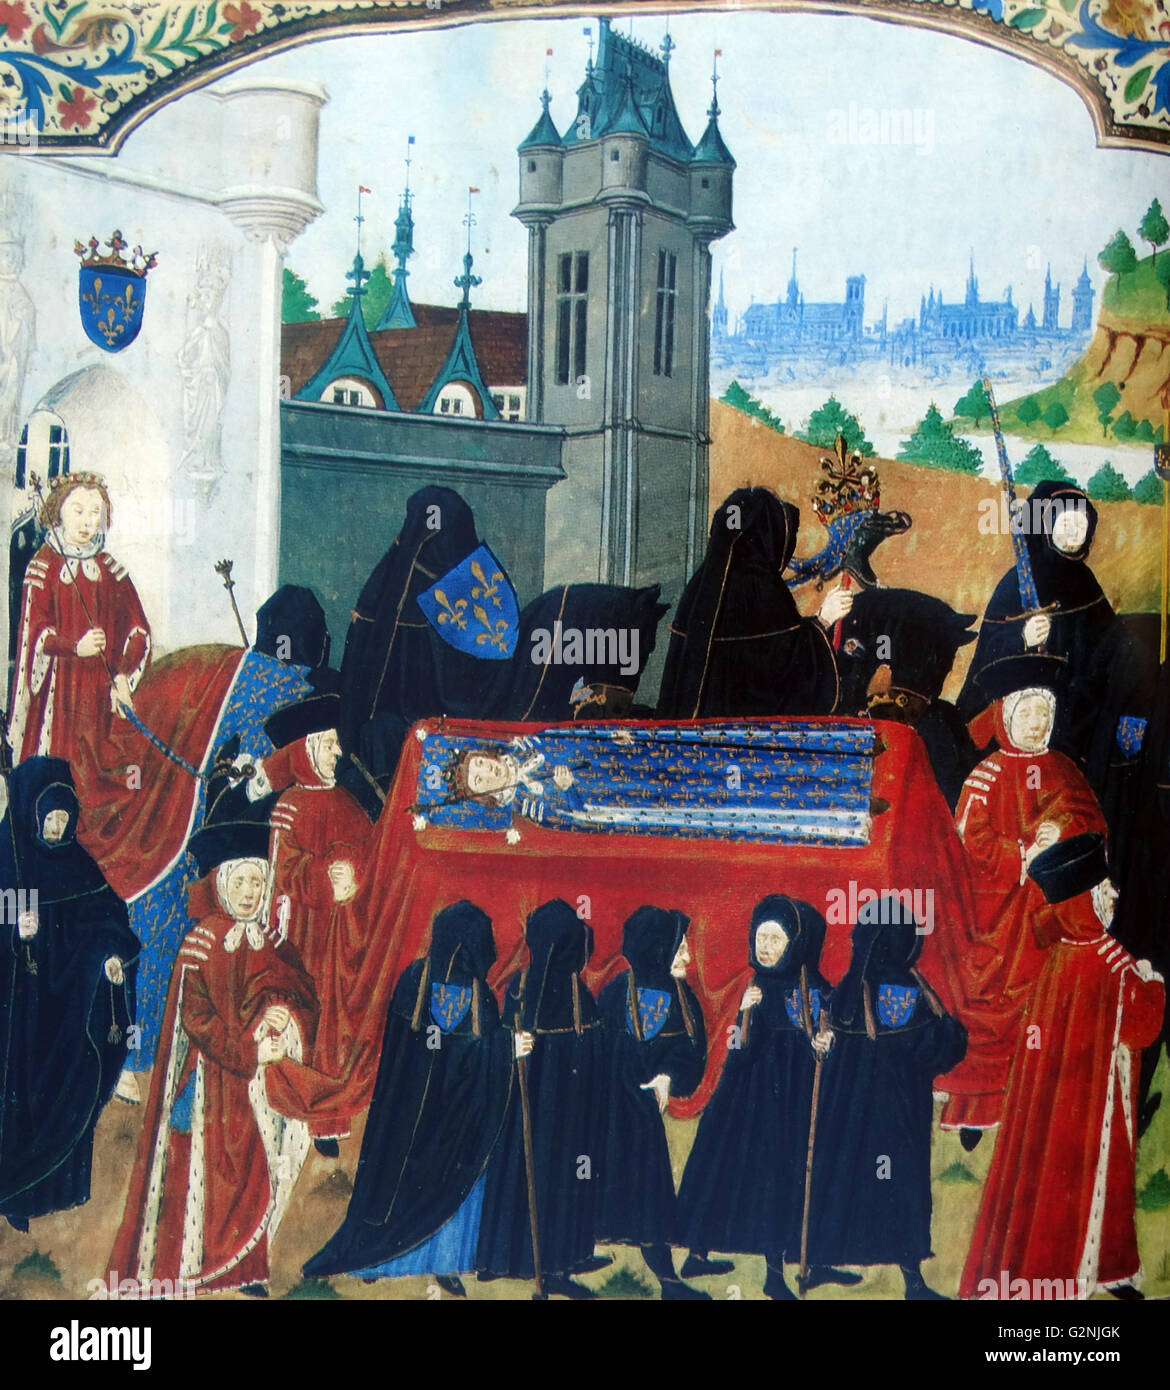 The funeral procession of Charles VI of France, le Bien-Aimé, with Paris in the background. On the coffin lies a wax effigy arrayed with all the attributes of Power. The mourners are depicted in black with exception of the members of Parliament. Dated 15th Century Stock Photo